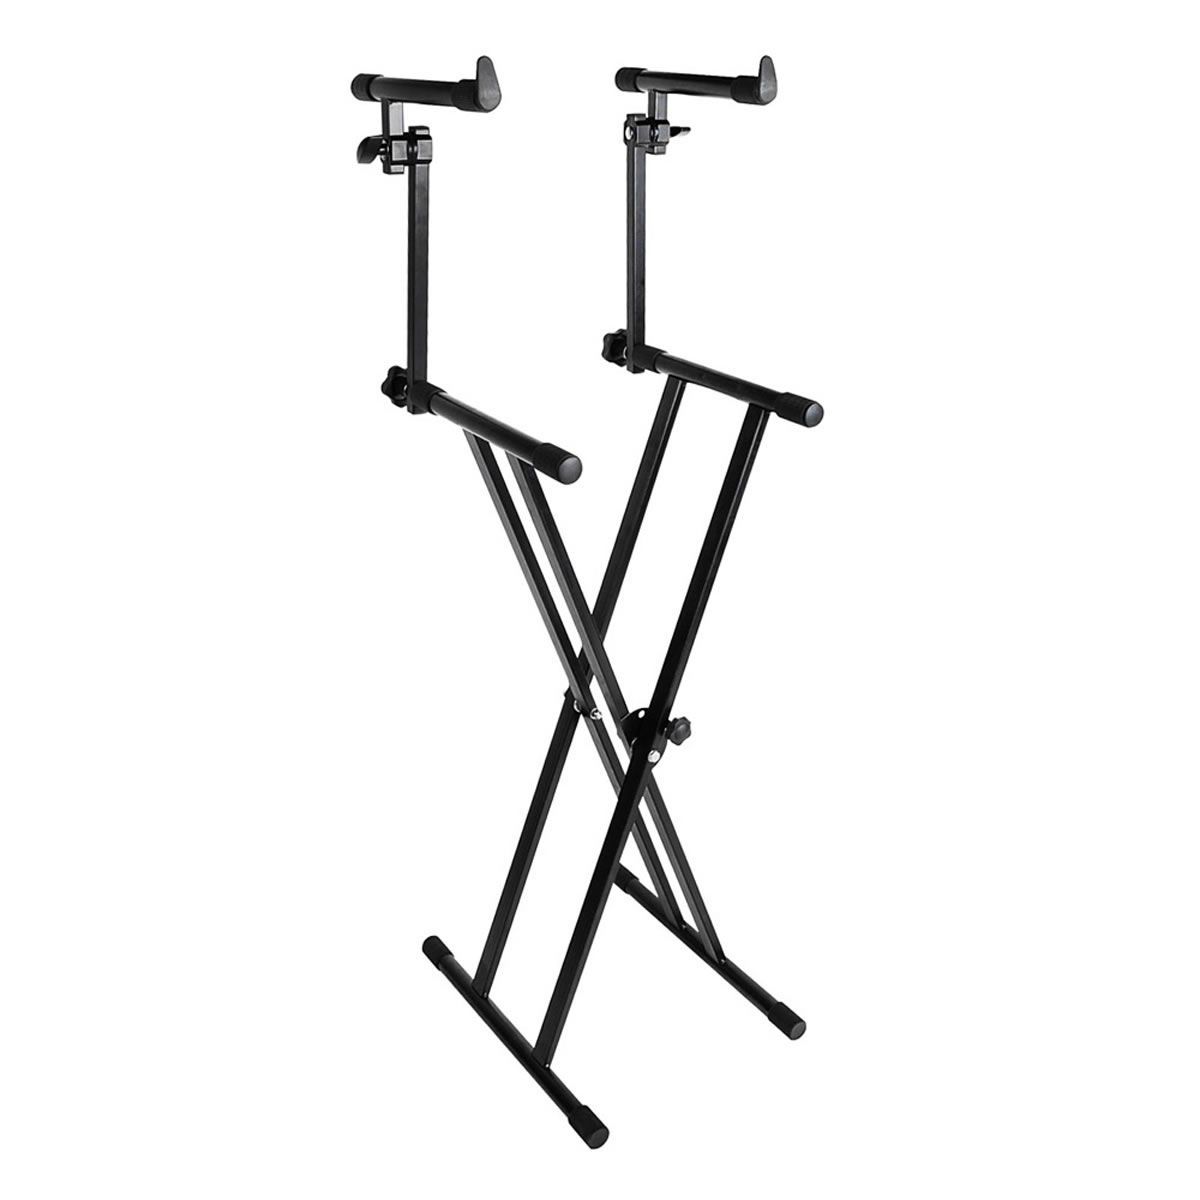 Double Type X Piano Keyboard Stand 2 Tier